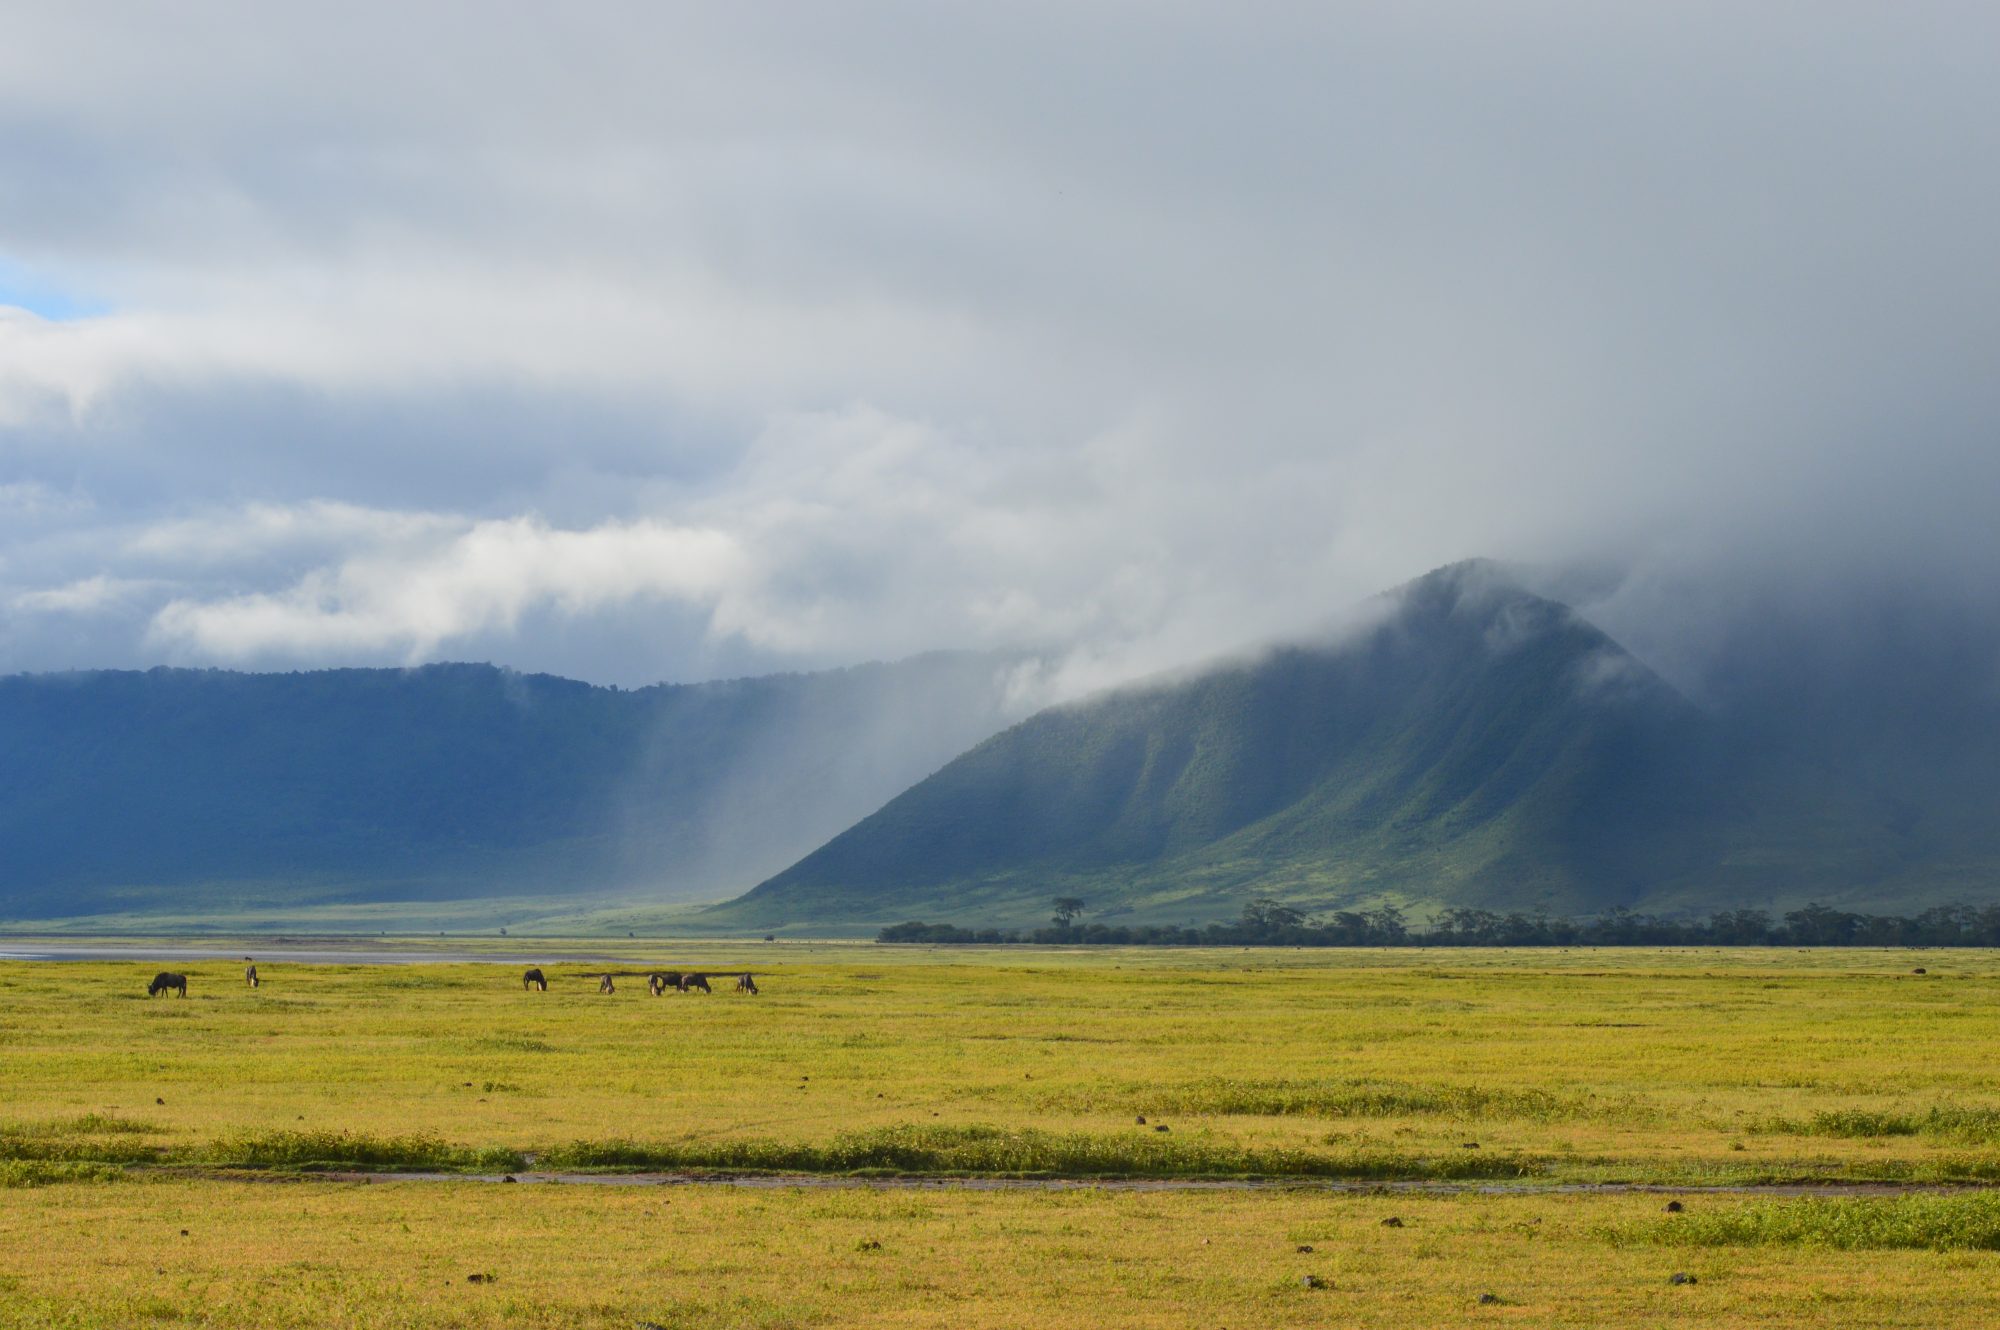 The Lake Eyasi Ngorongoro with its distant animals and the large mountain shrouded in clouds and fog